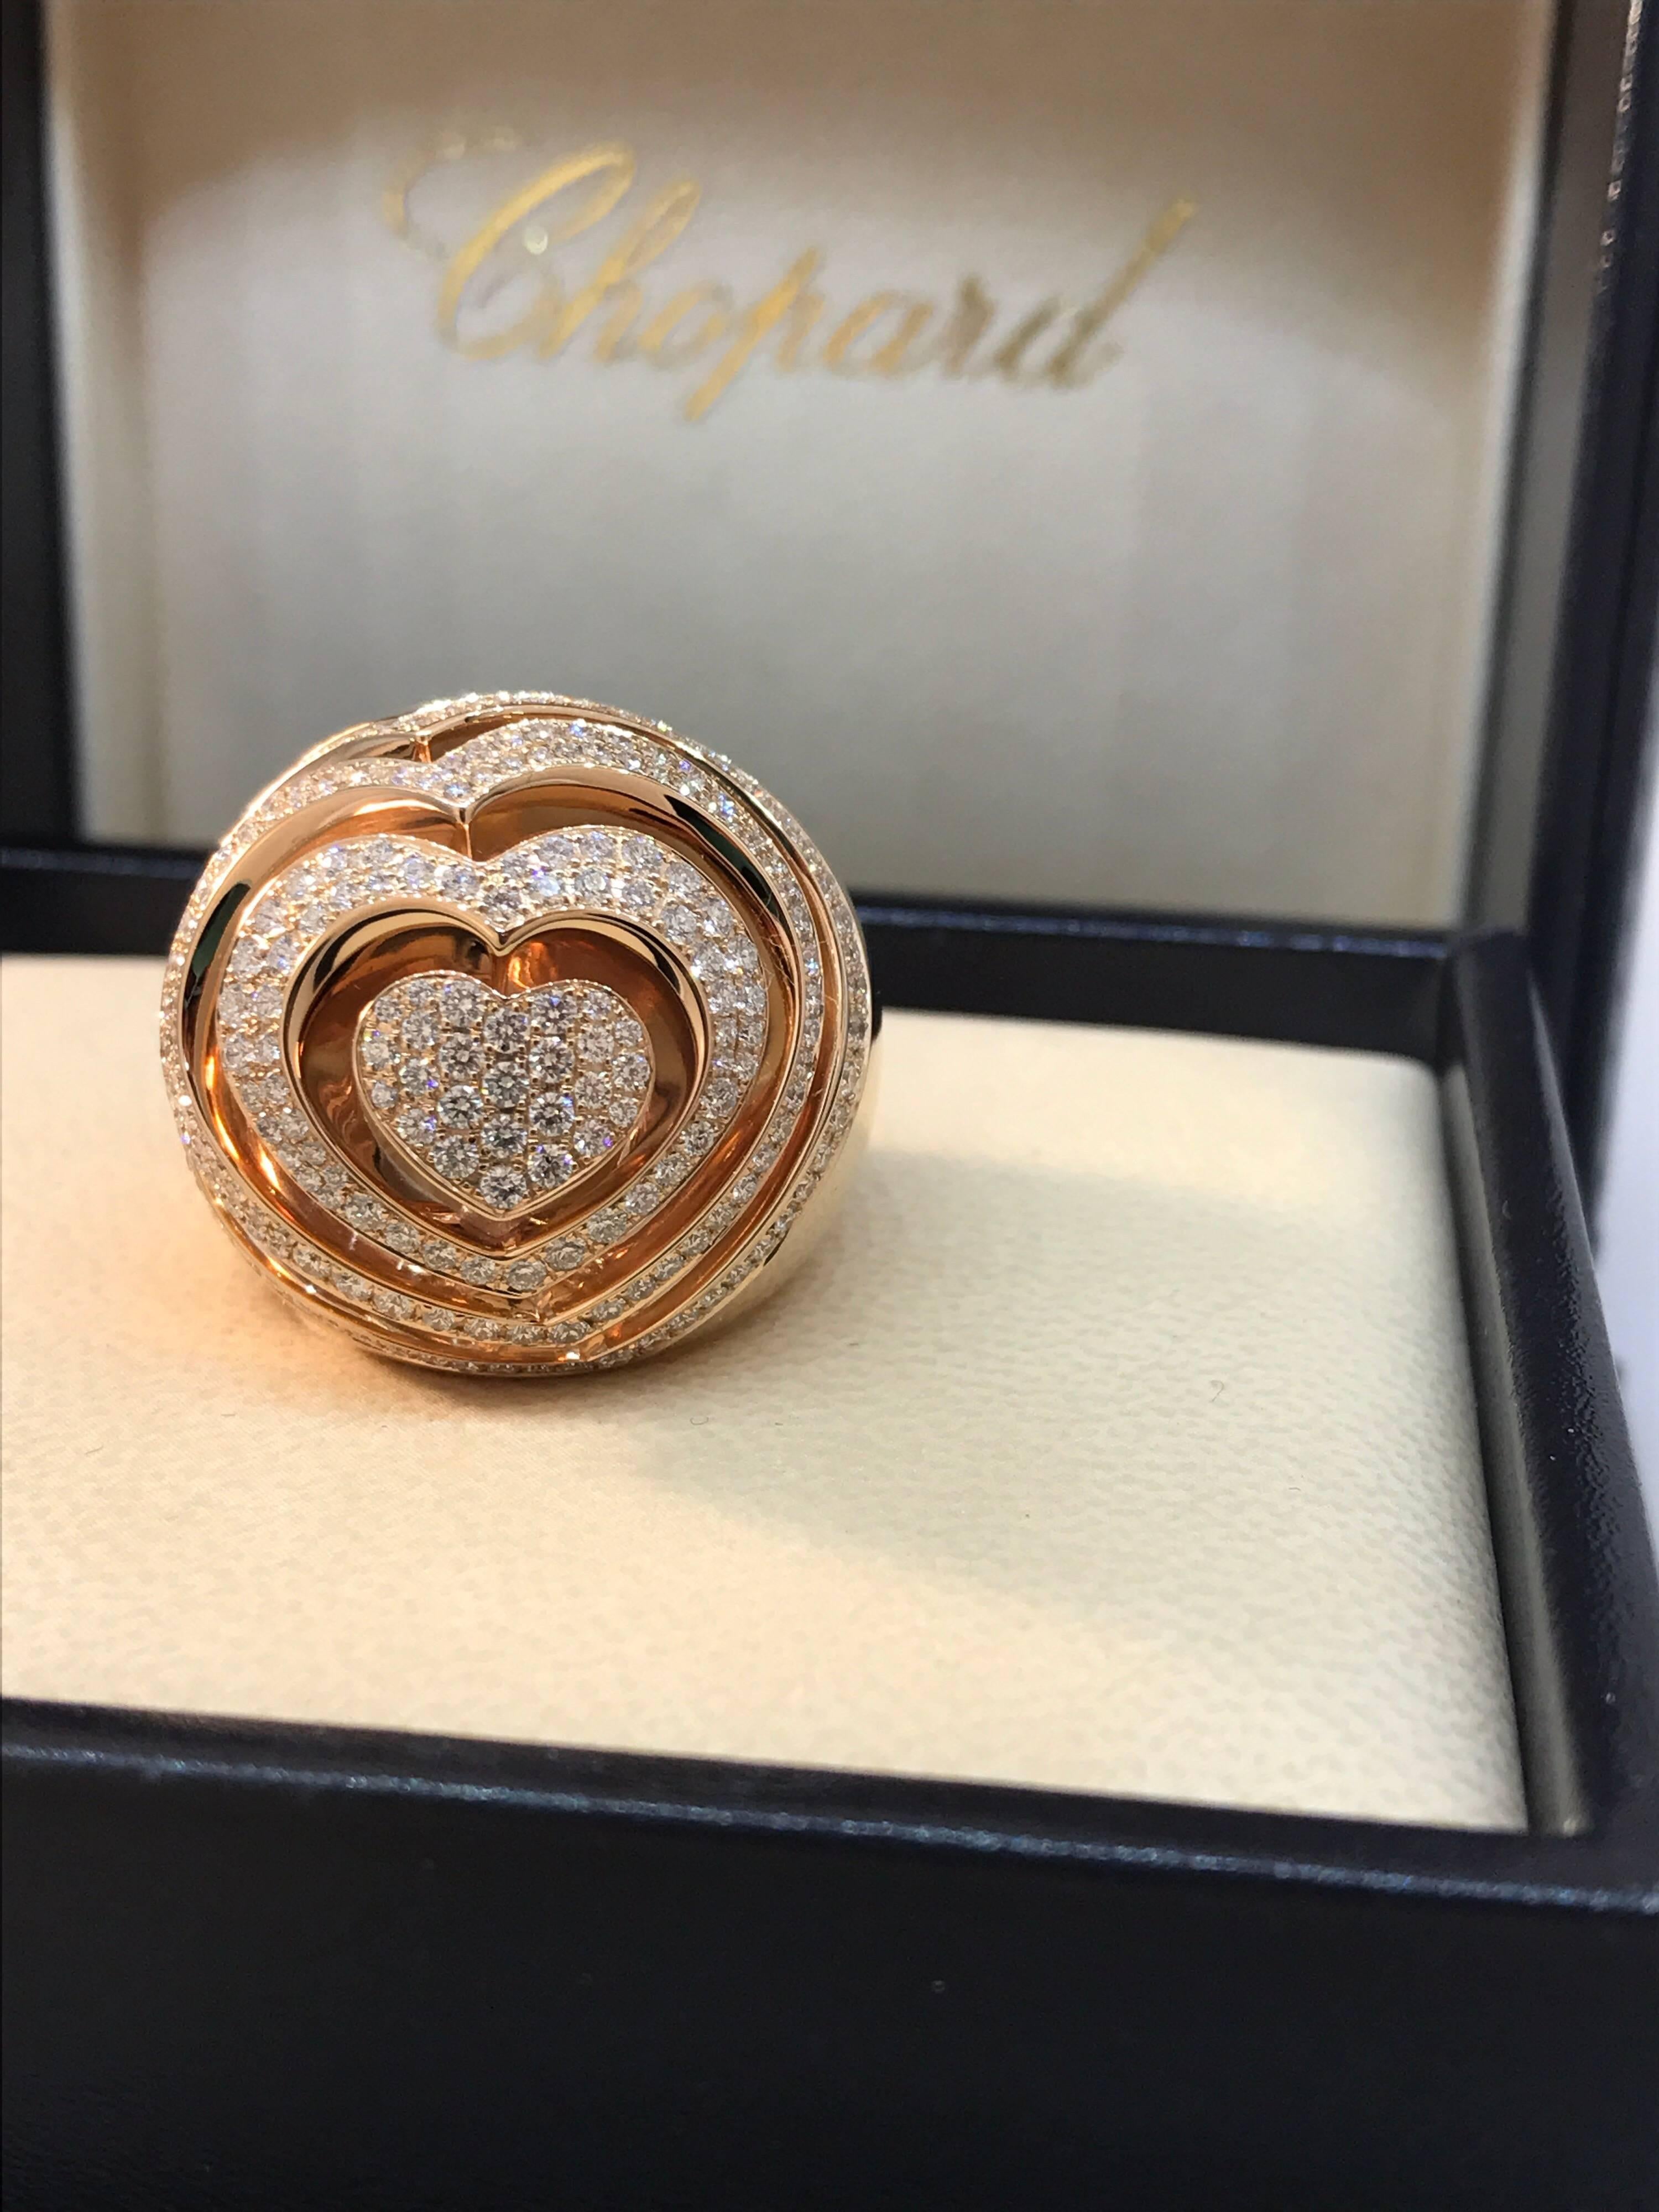 Chopard Xtravaganza Rose Gold Diamond Large Heart Dome Ring  82/7215 For Sale 1